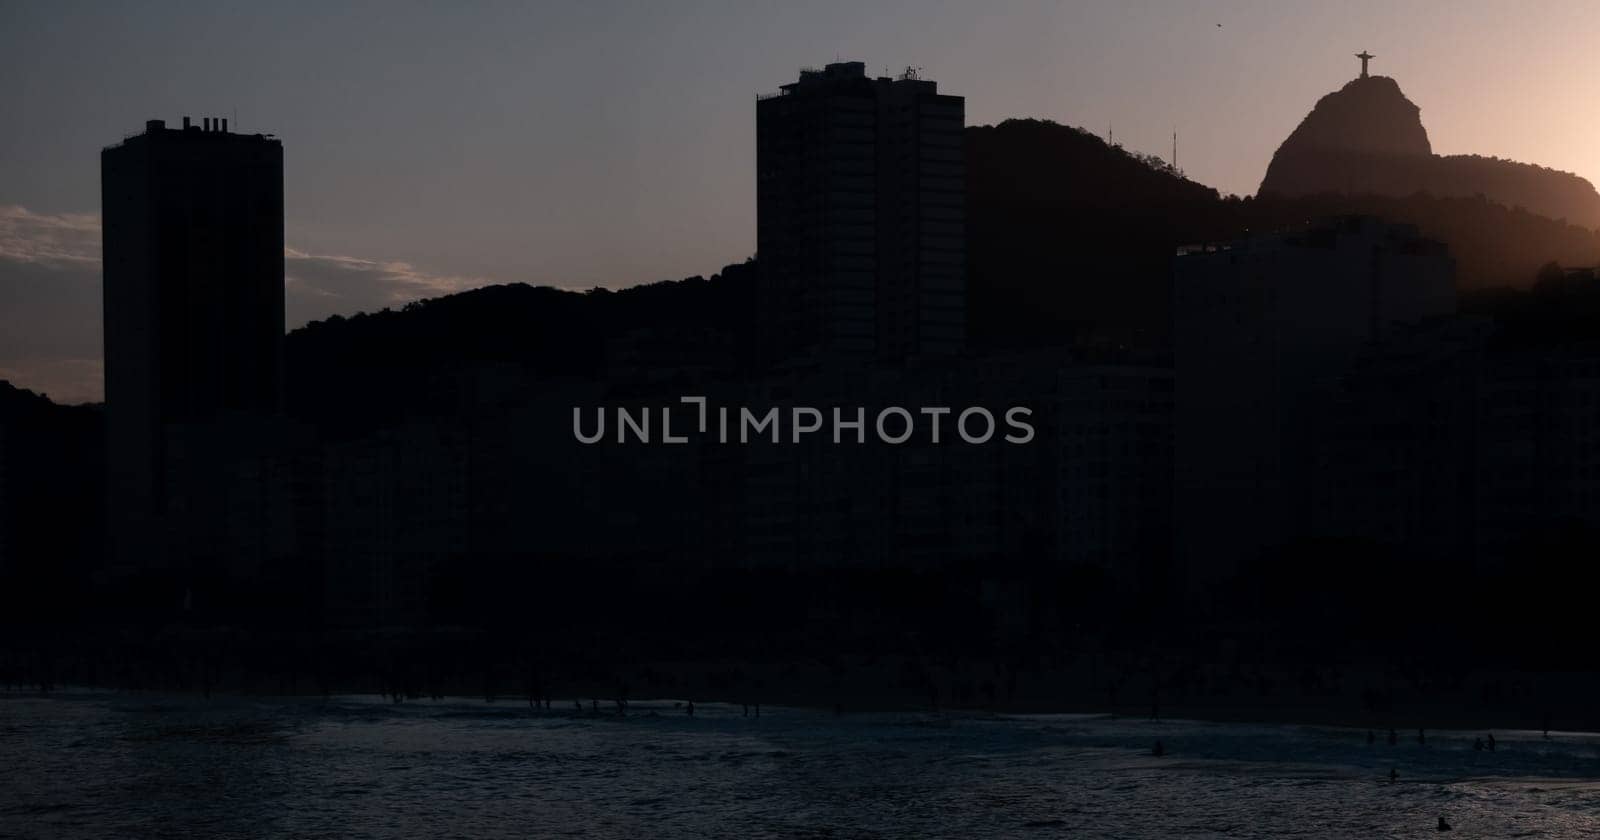 Silhouette of Christ the Redeemer Over Rio at Twilight by FerradalFCG